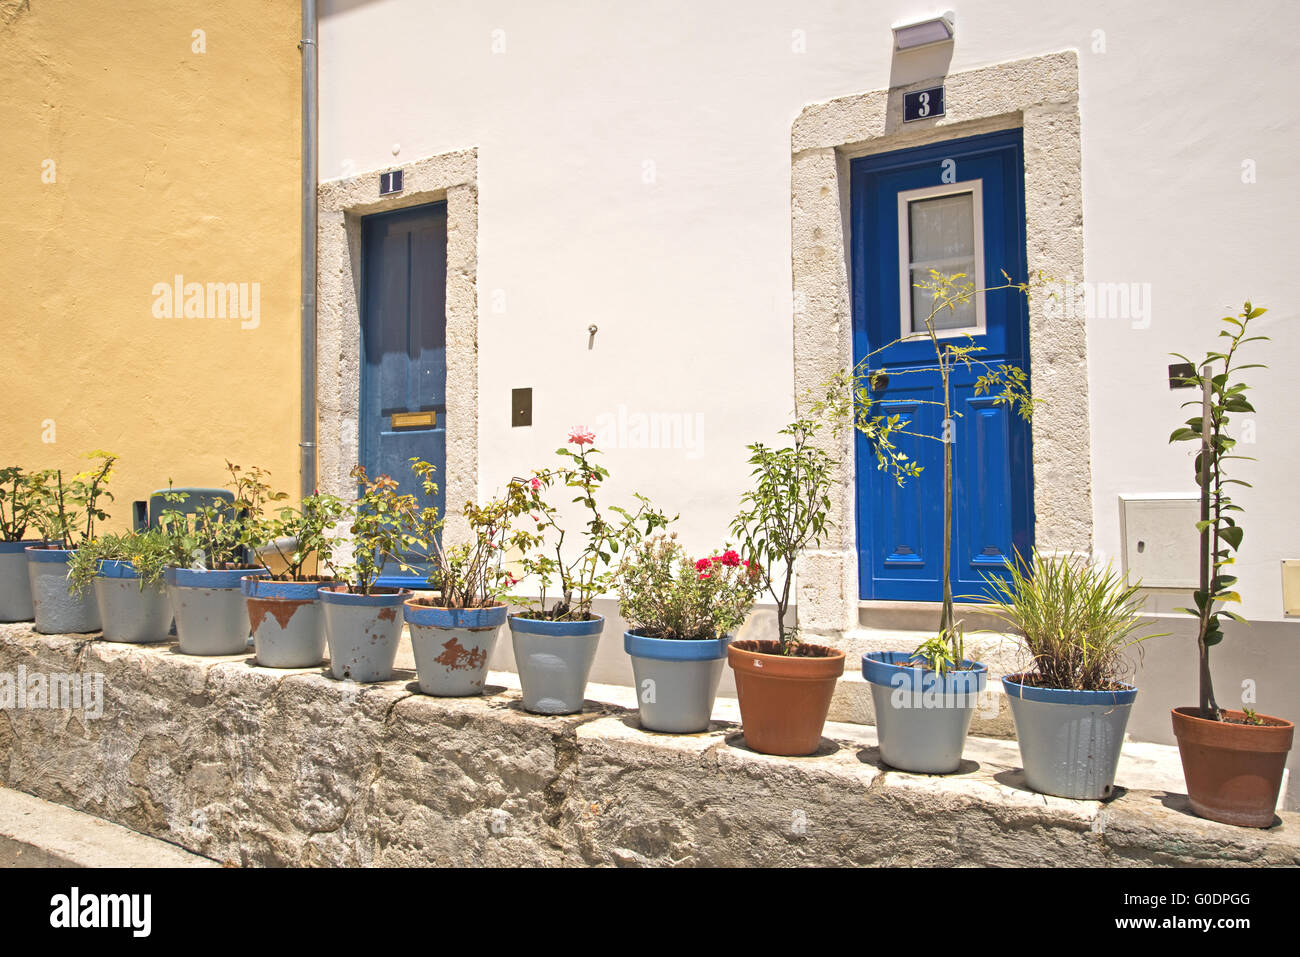 Flower pots in front of two entrances Stock Photo